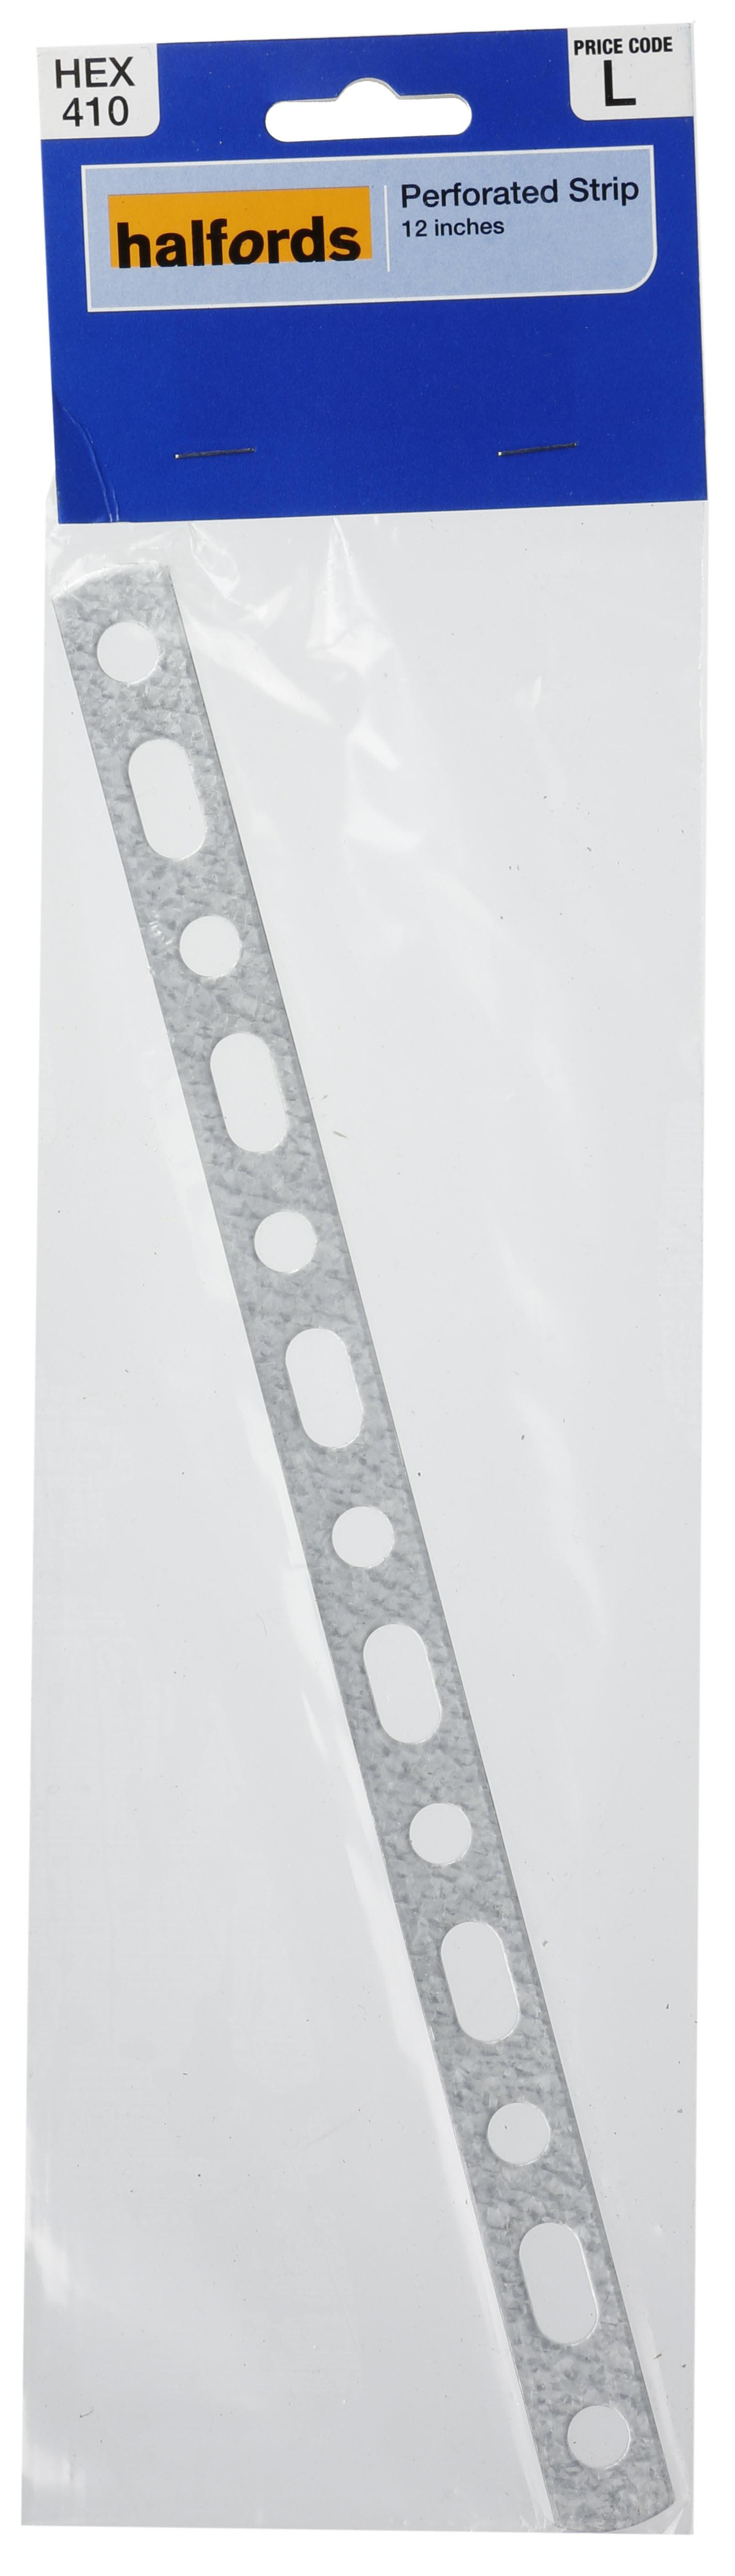 Halfords Perforated Strip 12 Inch (Hex410)